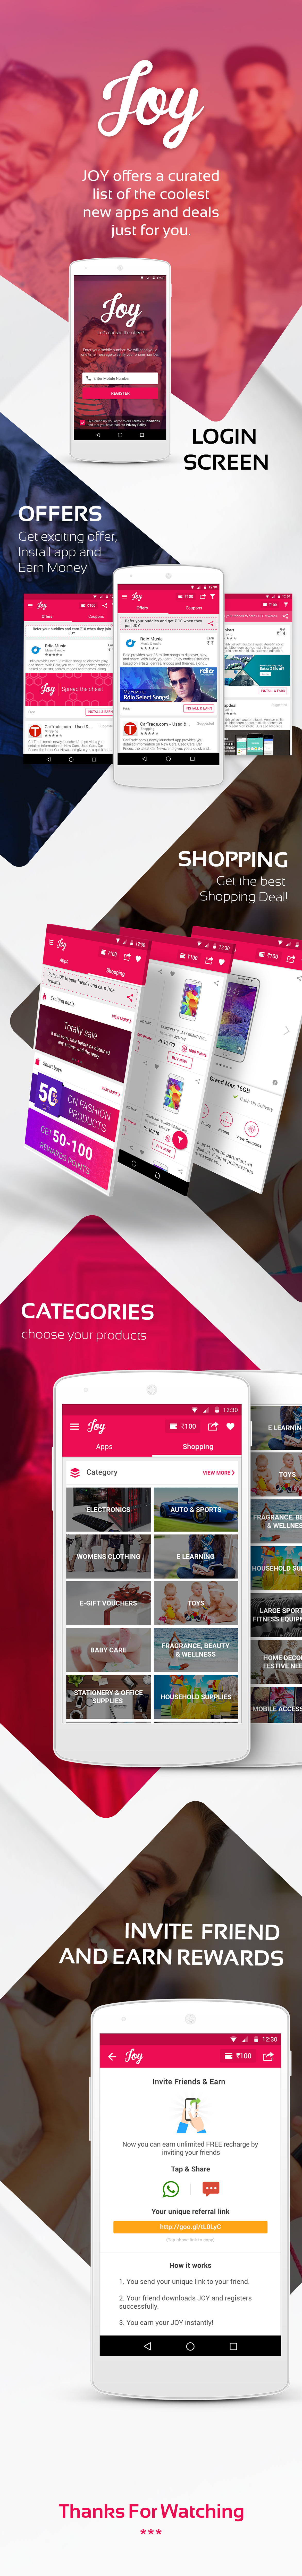 rechargeapp joy mobileappdesign design graphics applications mobility